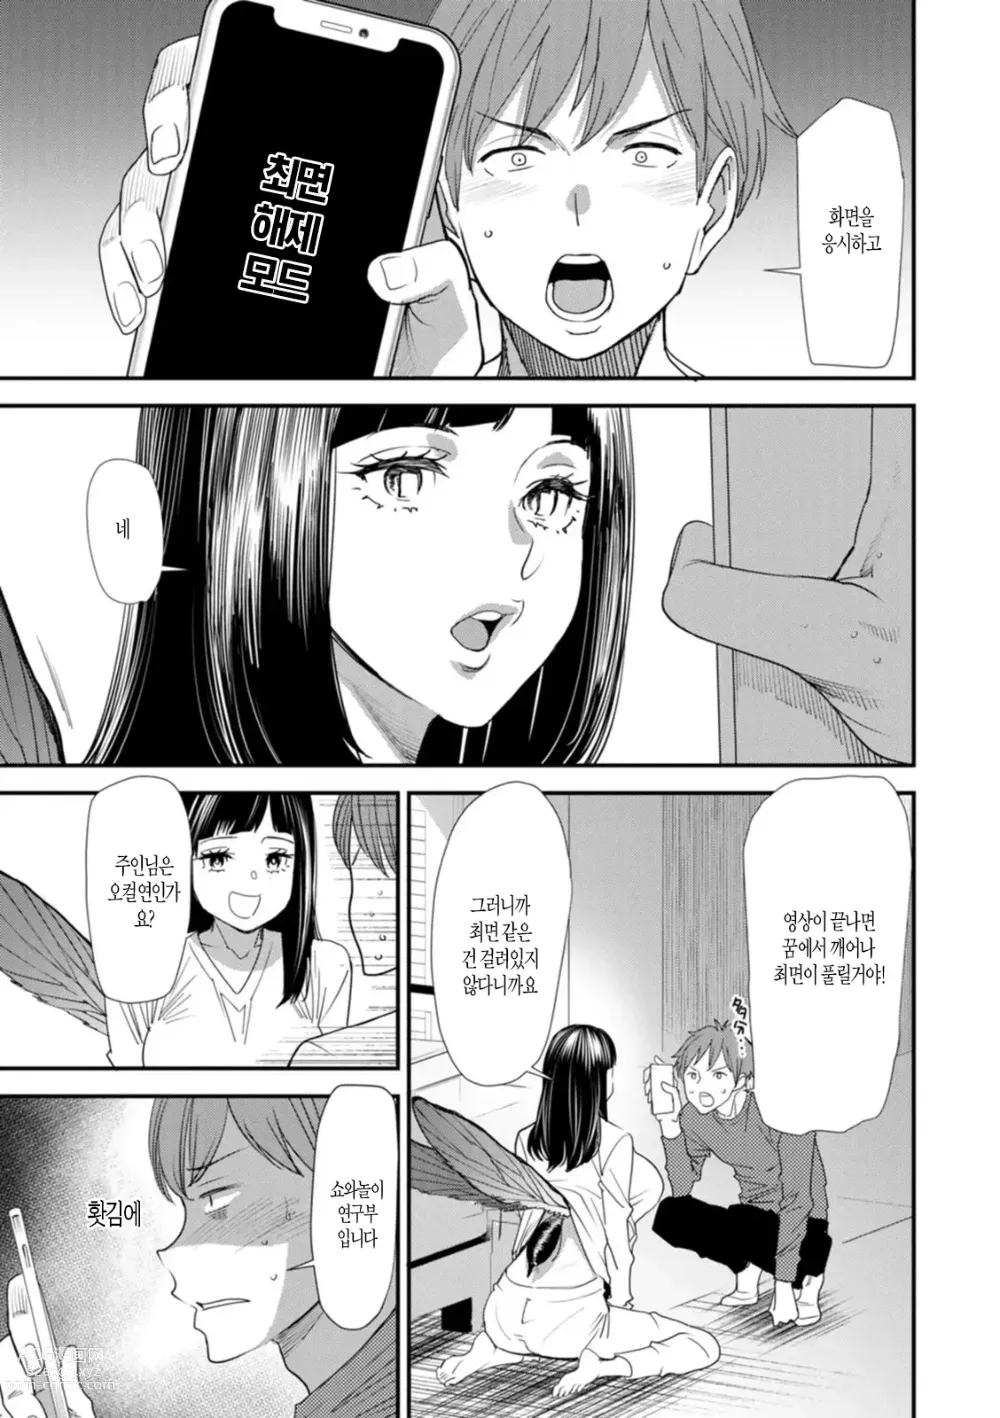 Page 45 of manga Inma Joshi Daisei no Yuuutsu Ch. 1-3  The Melancholy of the Succubus who is a college student 음마 여대생의 우울